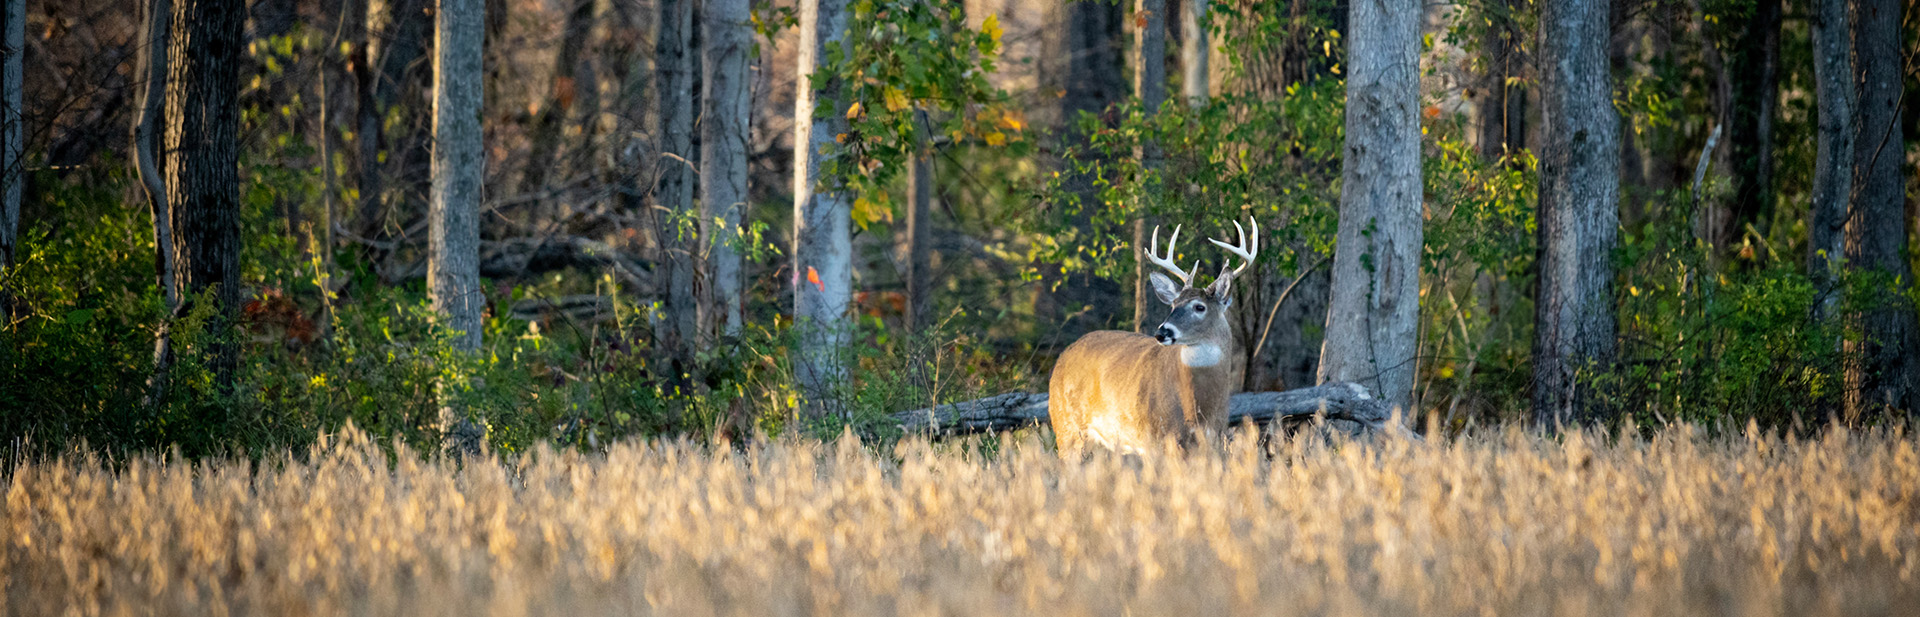 Buck in field, credit Chase Wininger, 2022